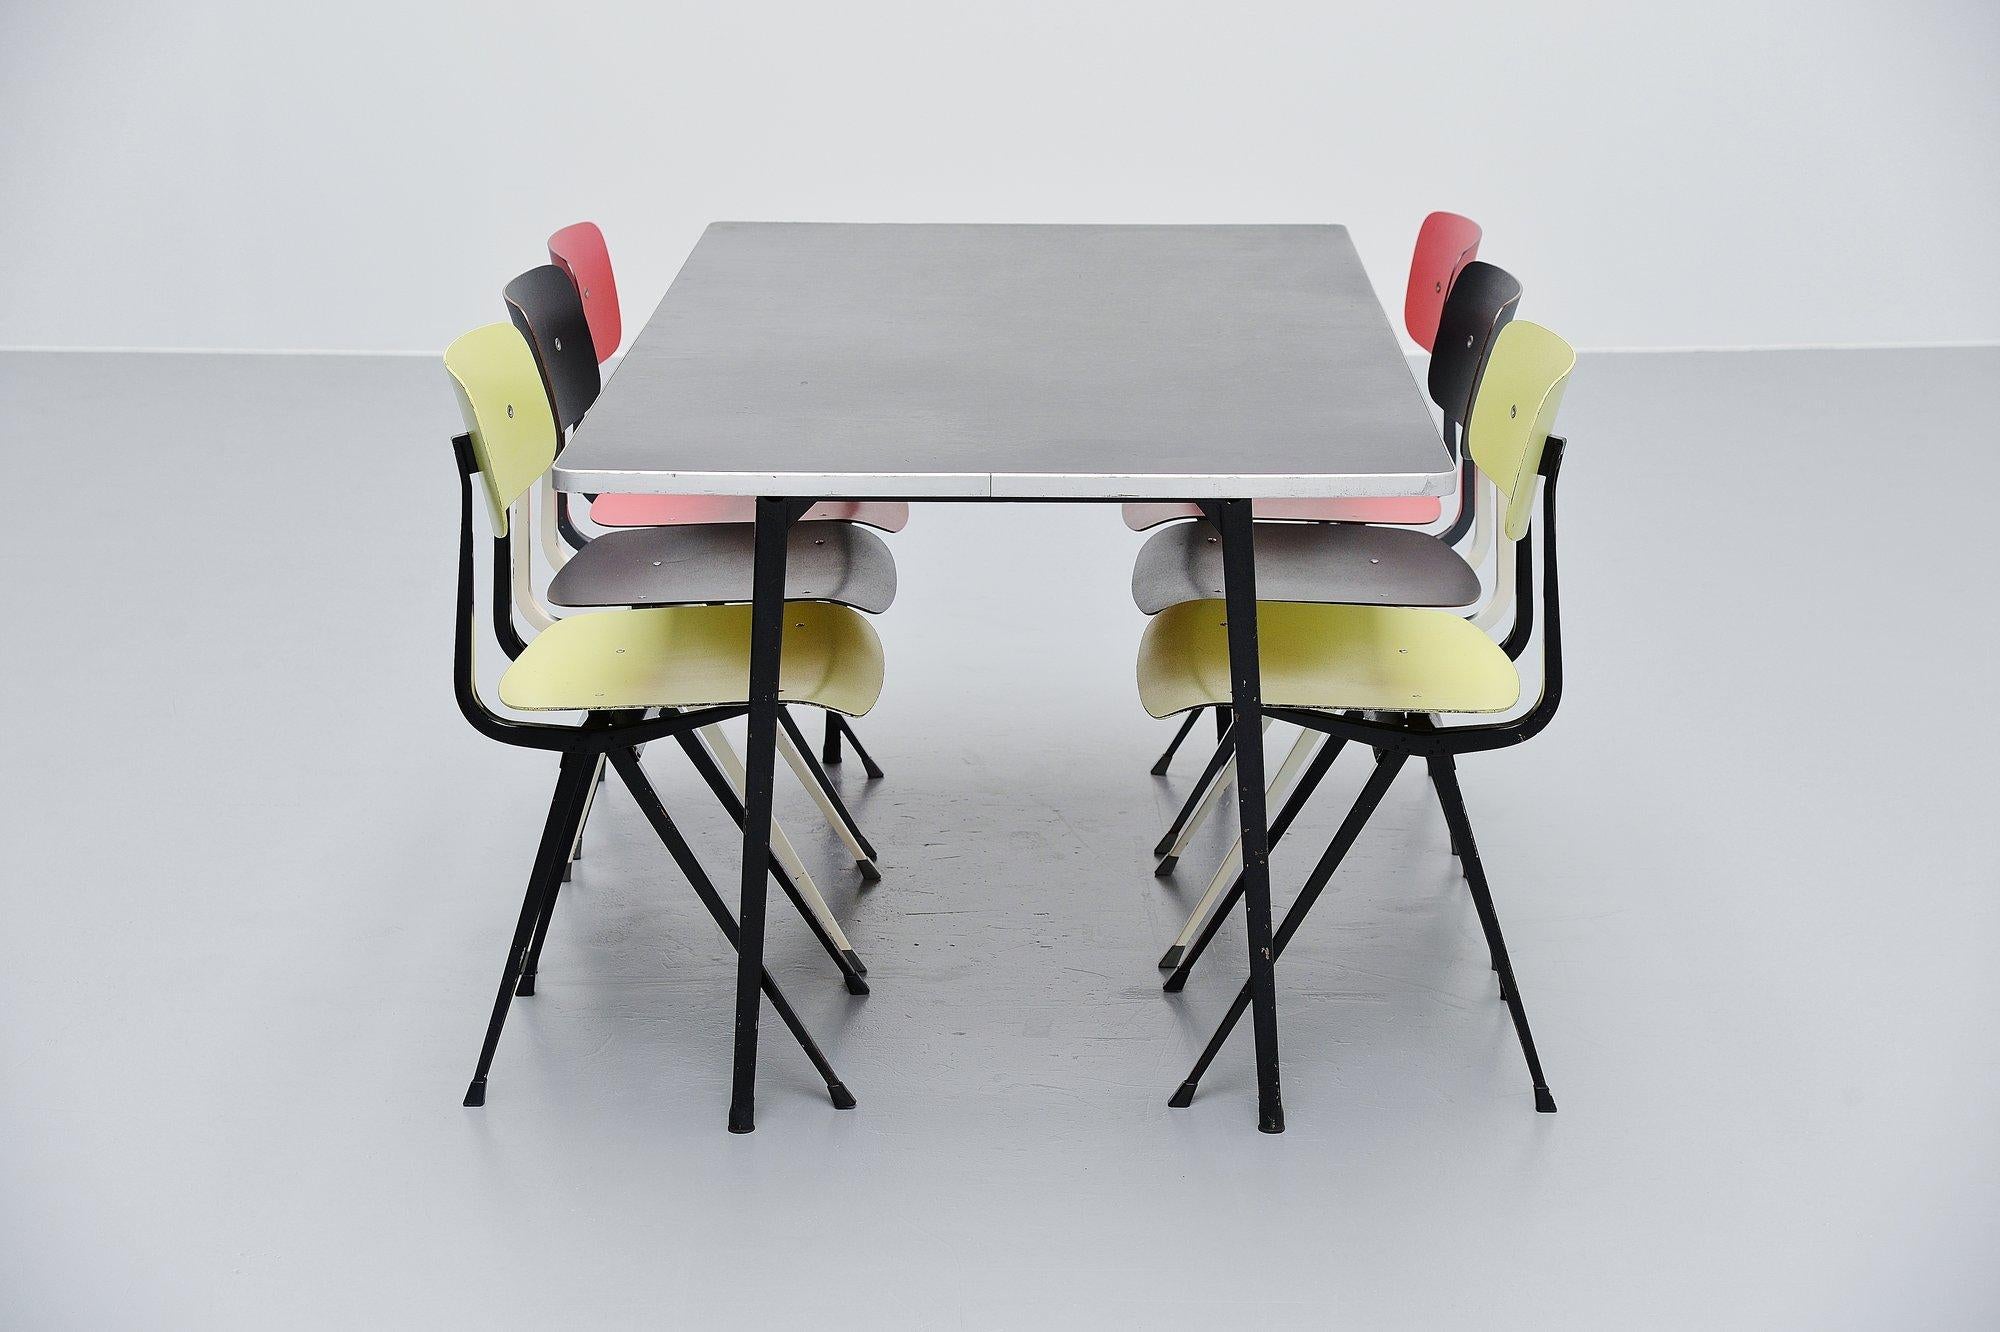 Nice medium sized industrial dining or working table designed by Friso Kramer for Ahrend de Cirkel, Holland 1955. This dining table was a part of the Reform table program that was designed by Friso Kramer in 1955. The Reform series contained a lot